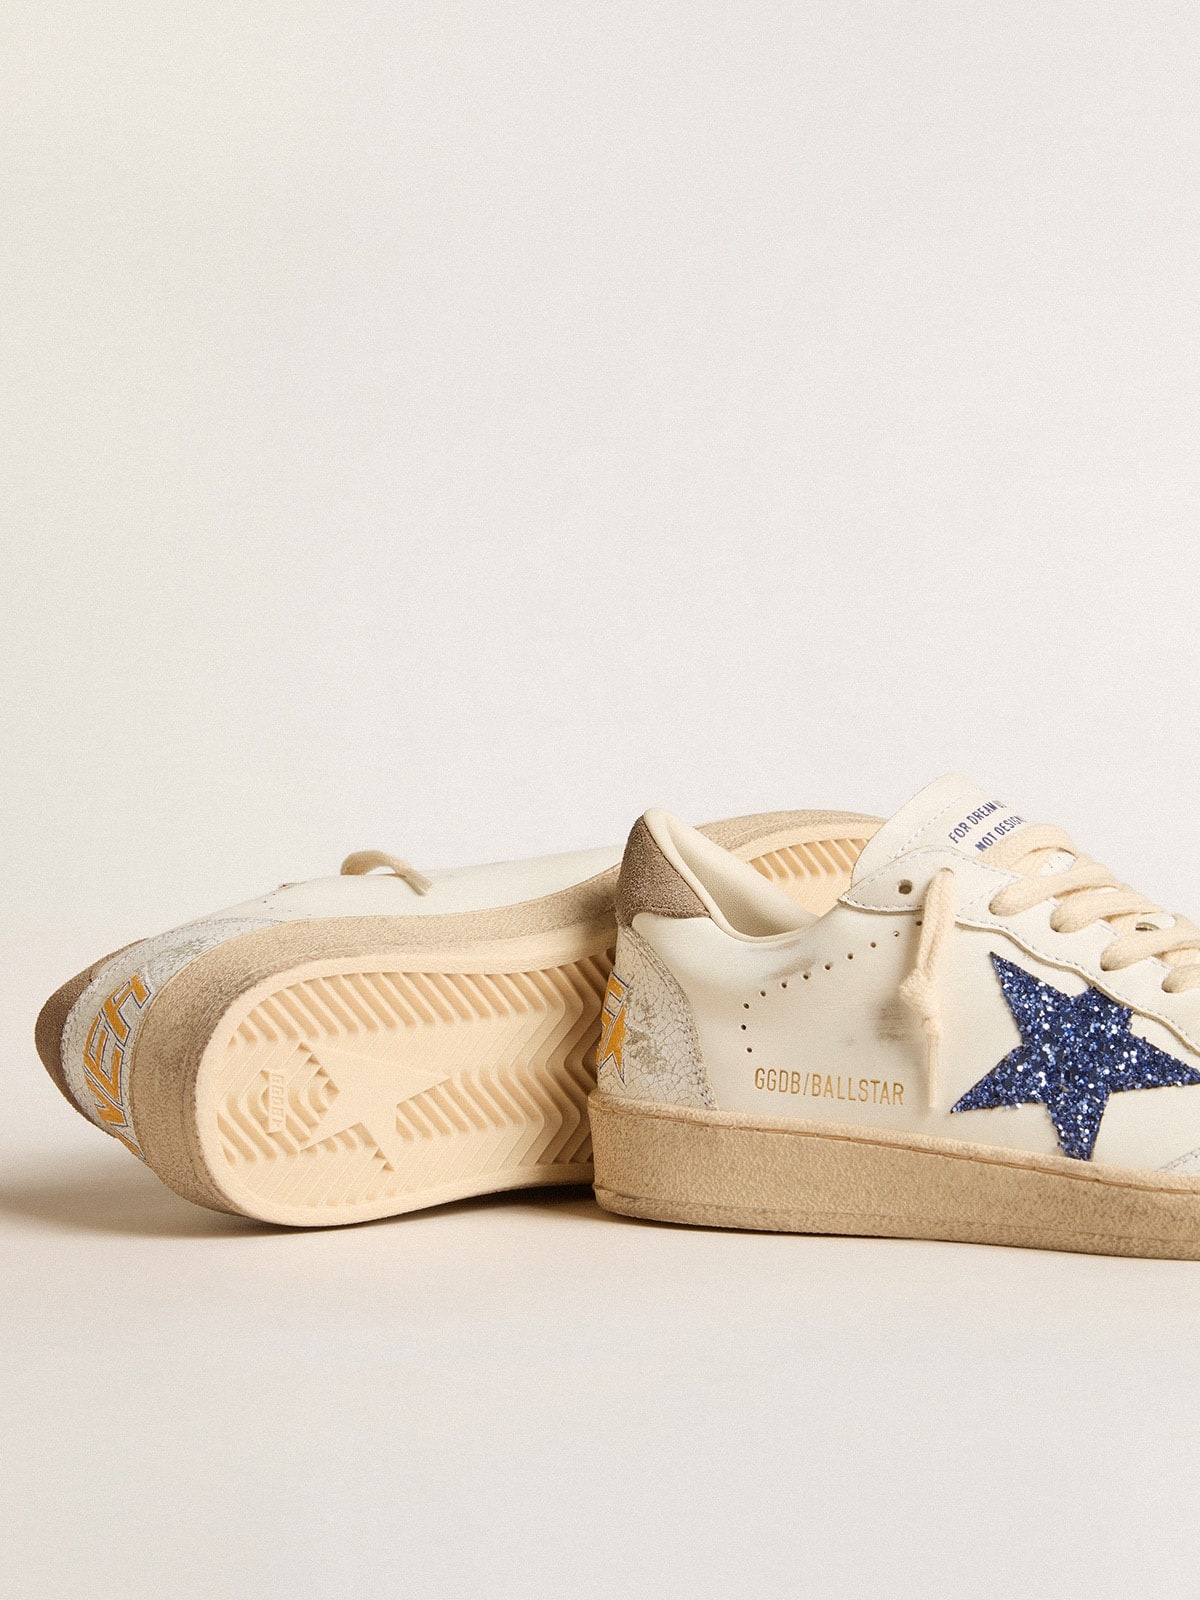 Ball Star with blue glitter star and dove-gray suede heel tab - 3